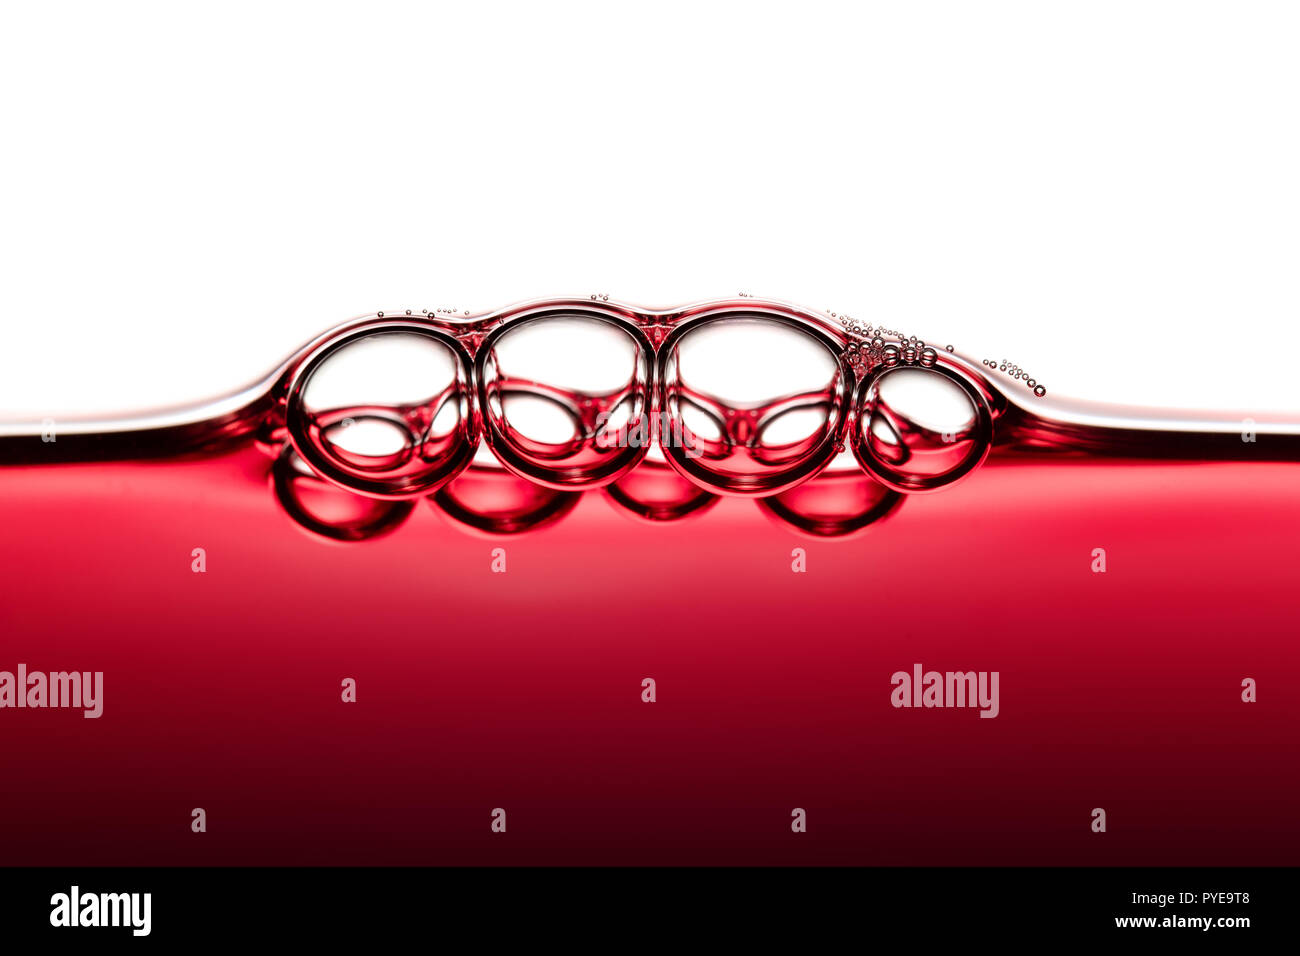 Abstract Food Art Pattern of Symmetrical Red Wine Bubbles photographed close-up against white background Stock Photo